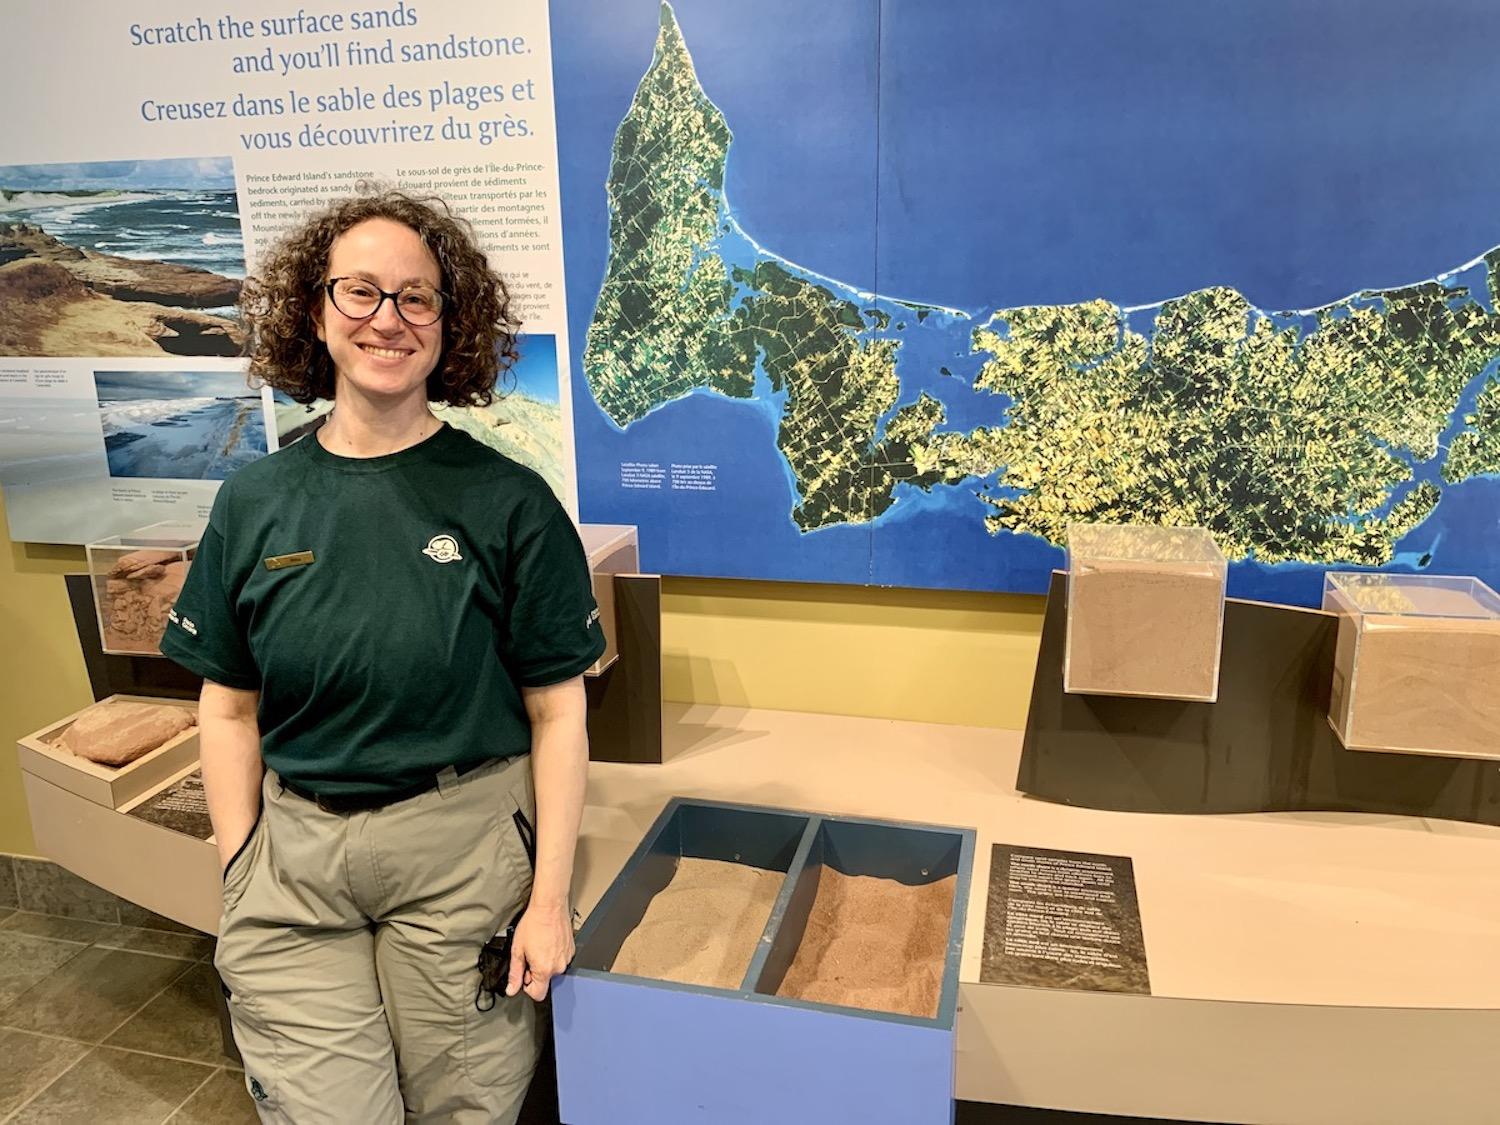 Rilla Marshall is the visitor services team lead at the park's Greenwich section.